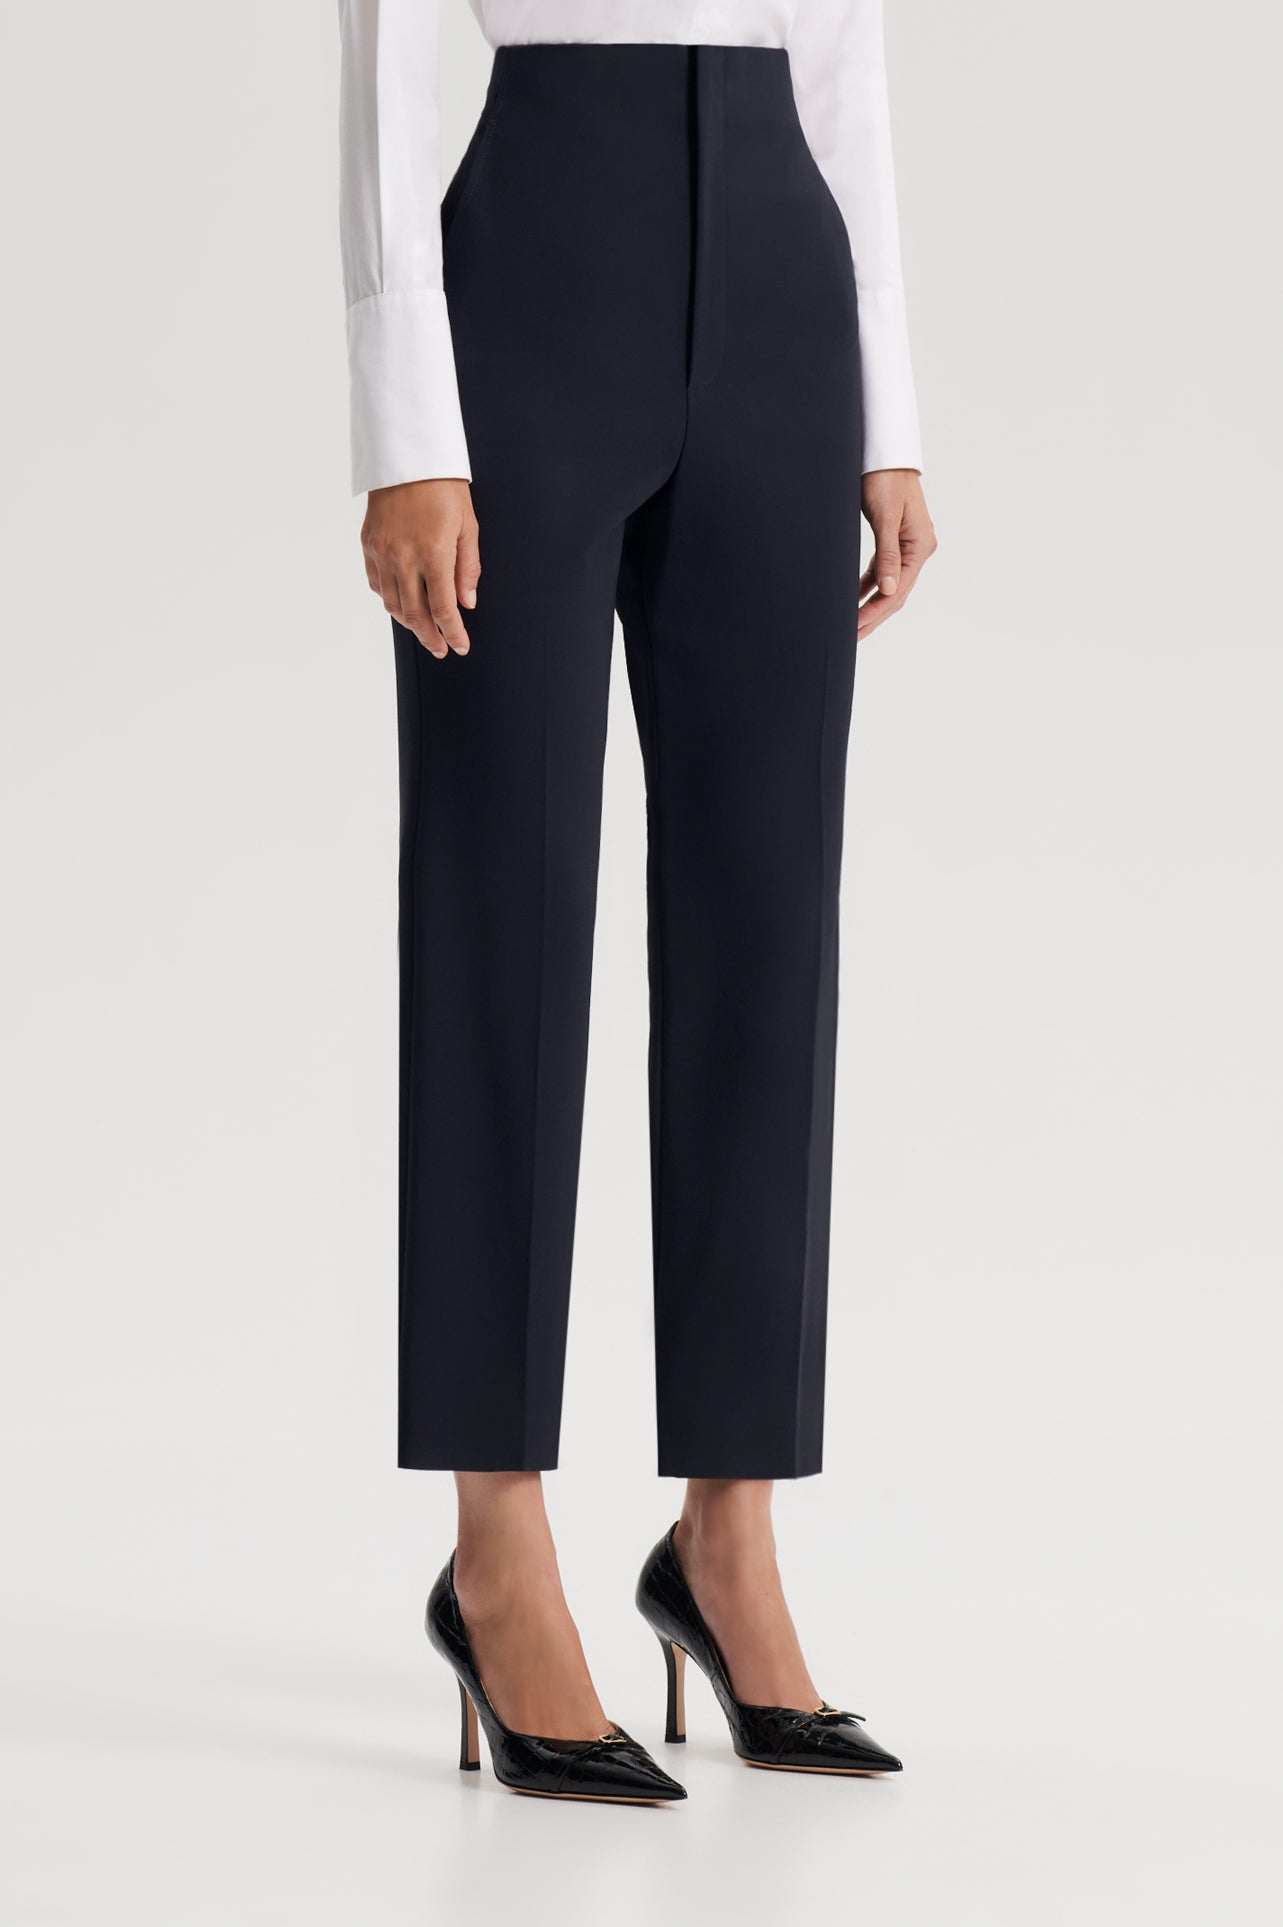 Cropped High Waisted Trousers - Black - Tailored Trousers - & Other Stories  | Clothes, Tailored trousers, High waisted pants